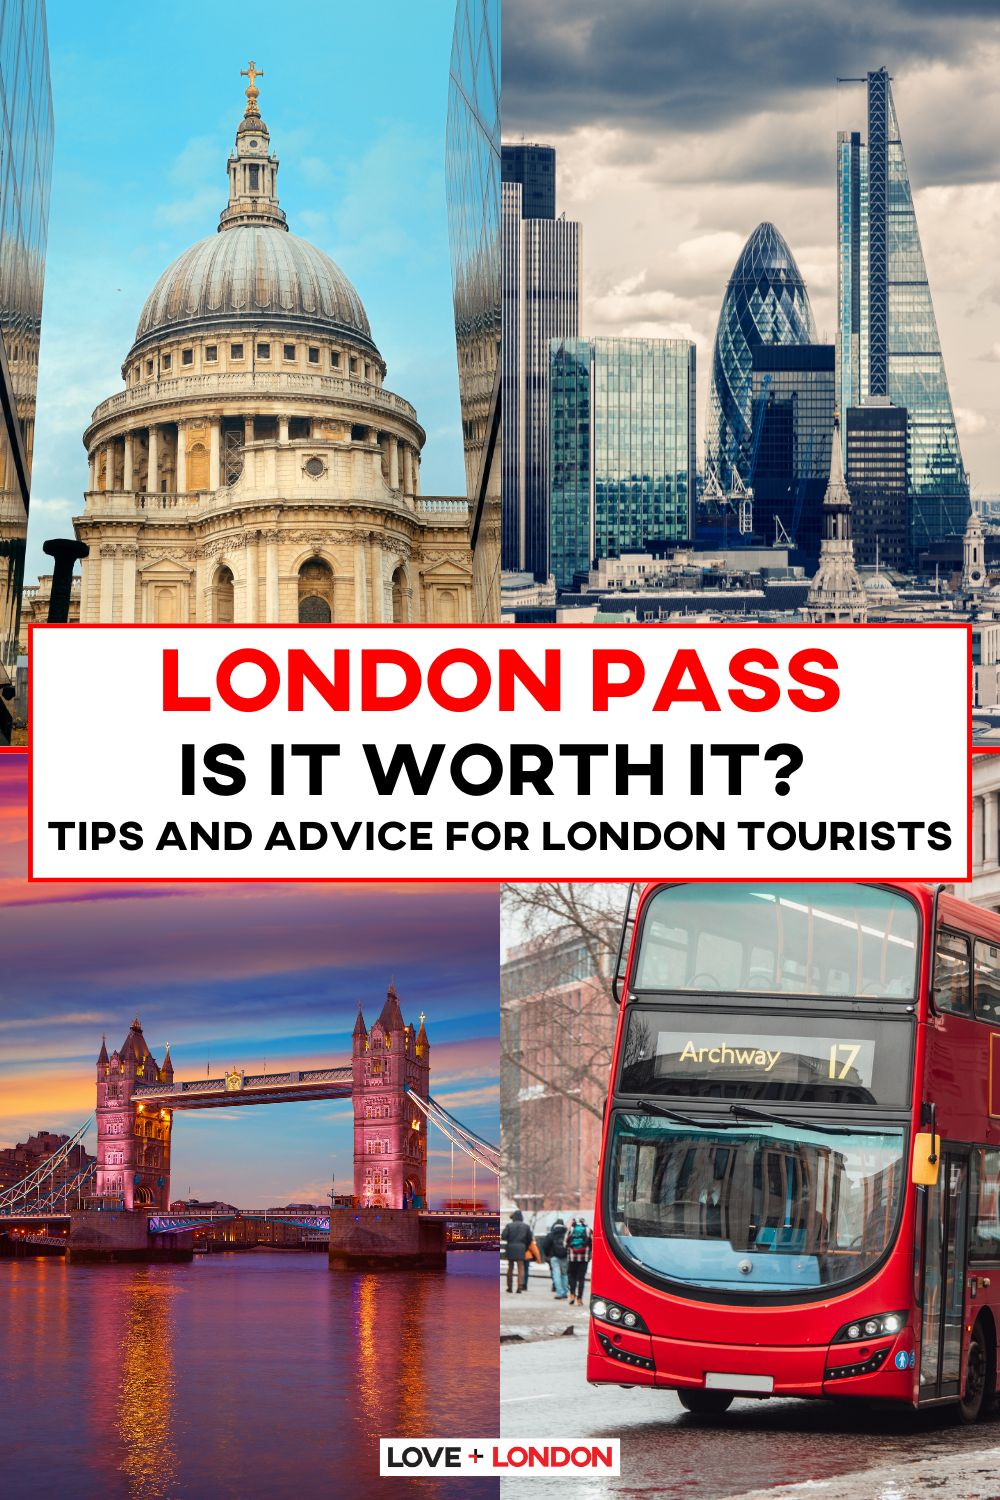 This is an image of a Pinterest pin detailing whether the London Pass is worth it or not.